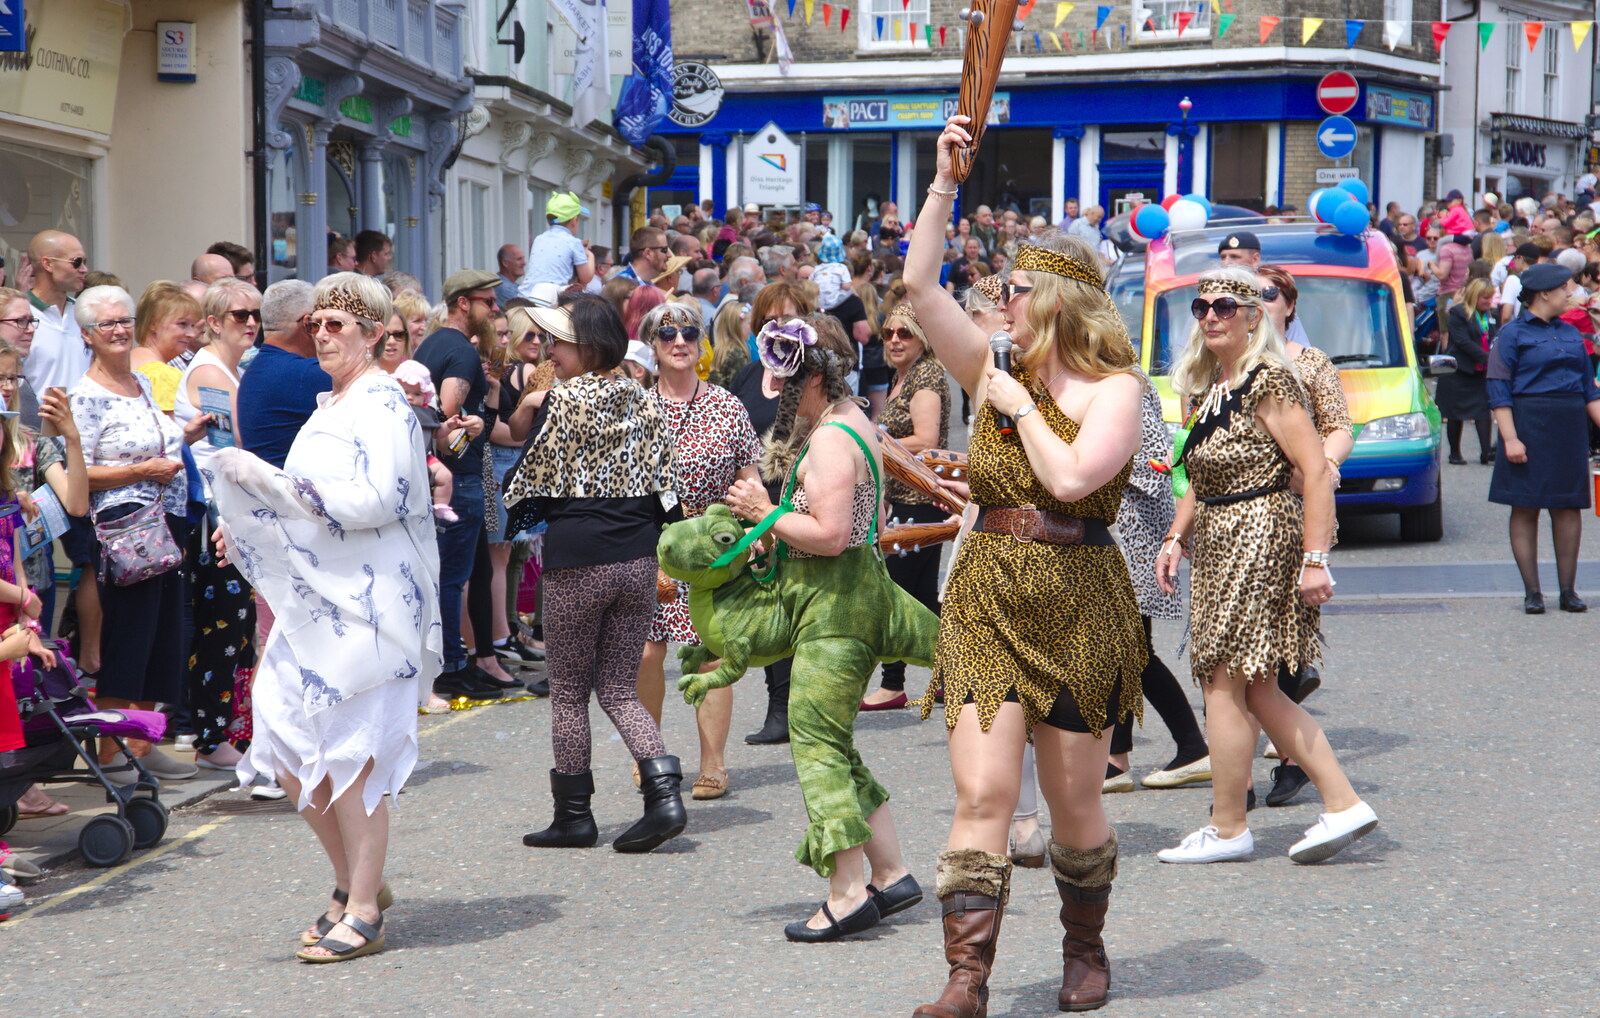 Plenty of leopard-skin costumes from The Diss Carnival 2019, Diss, Norfolk - 9th June 2019